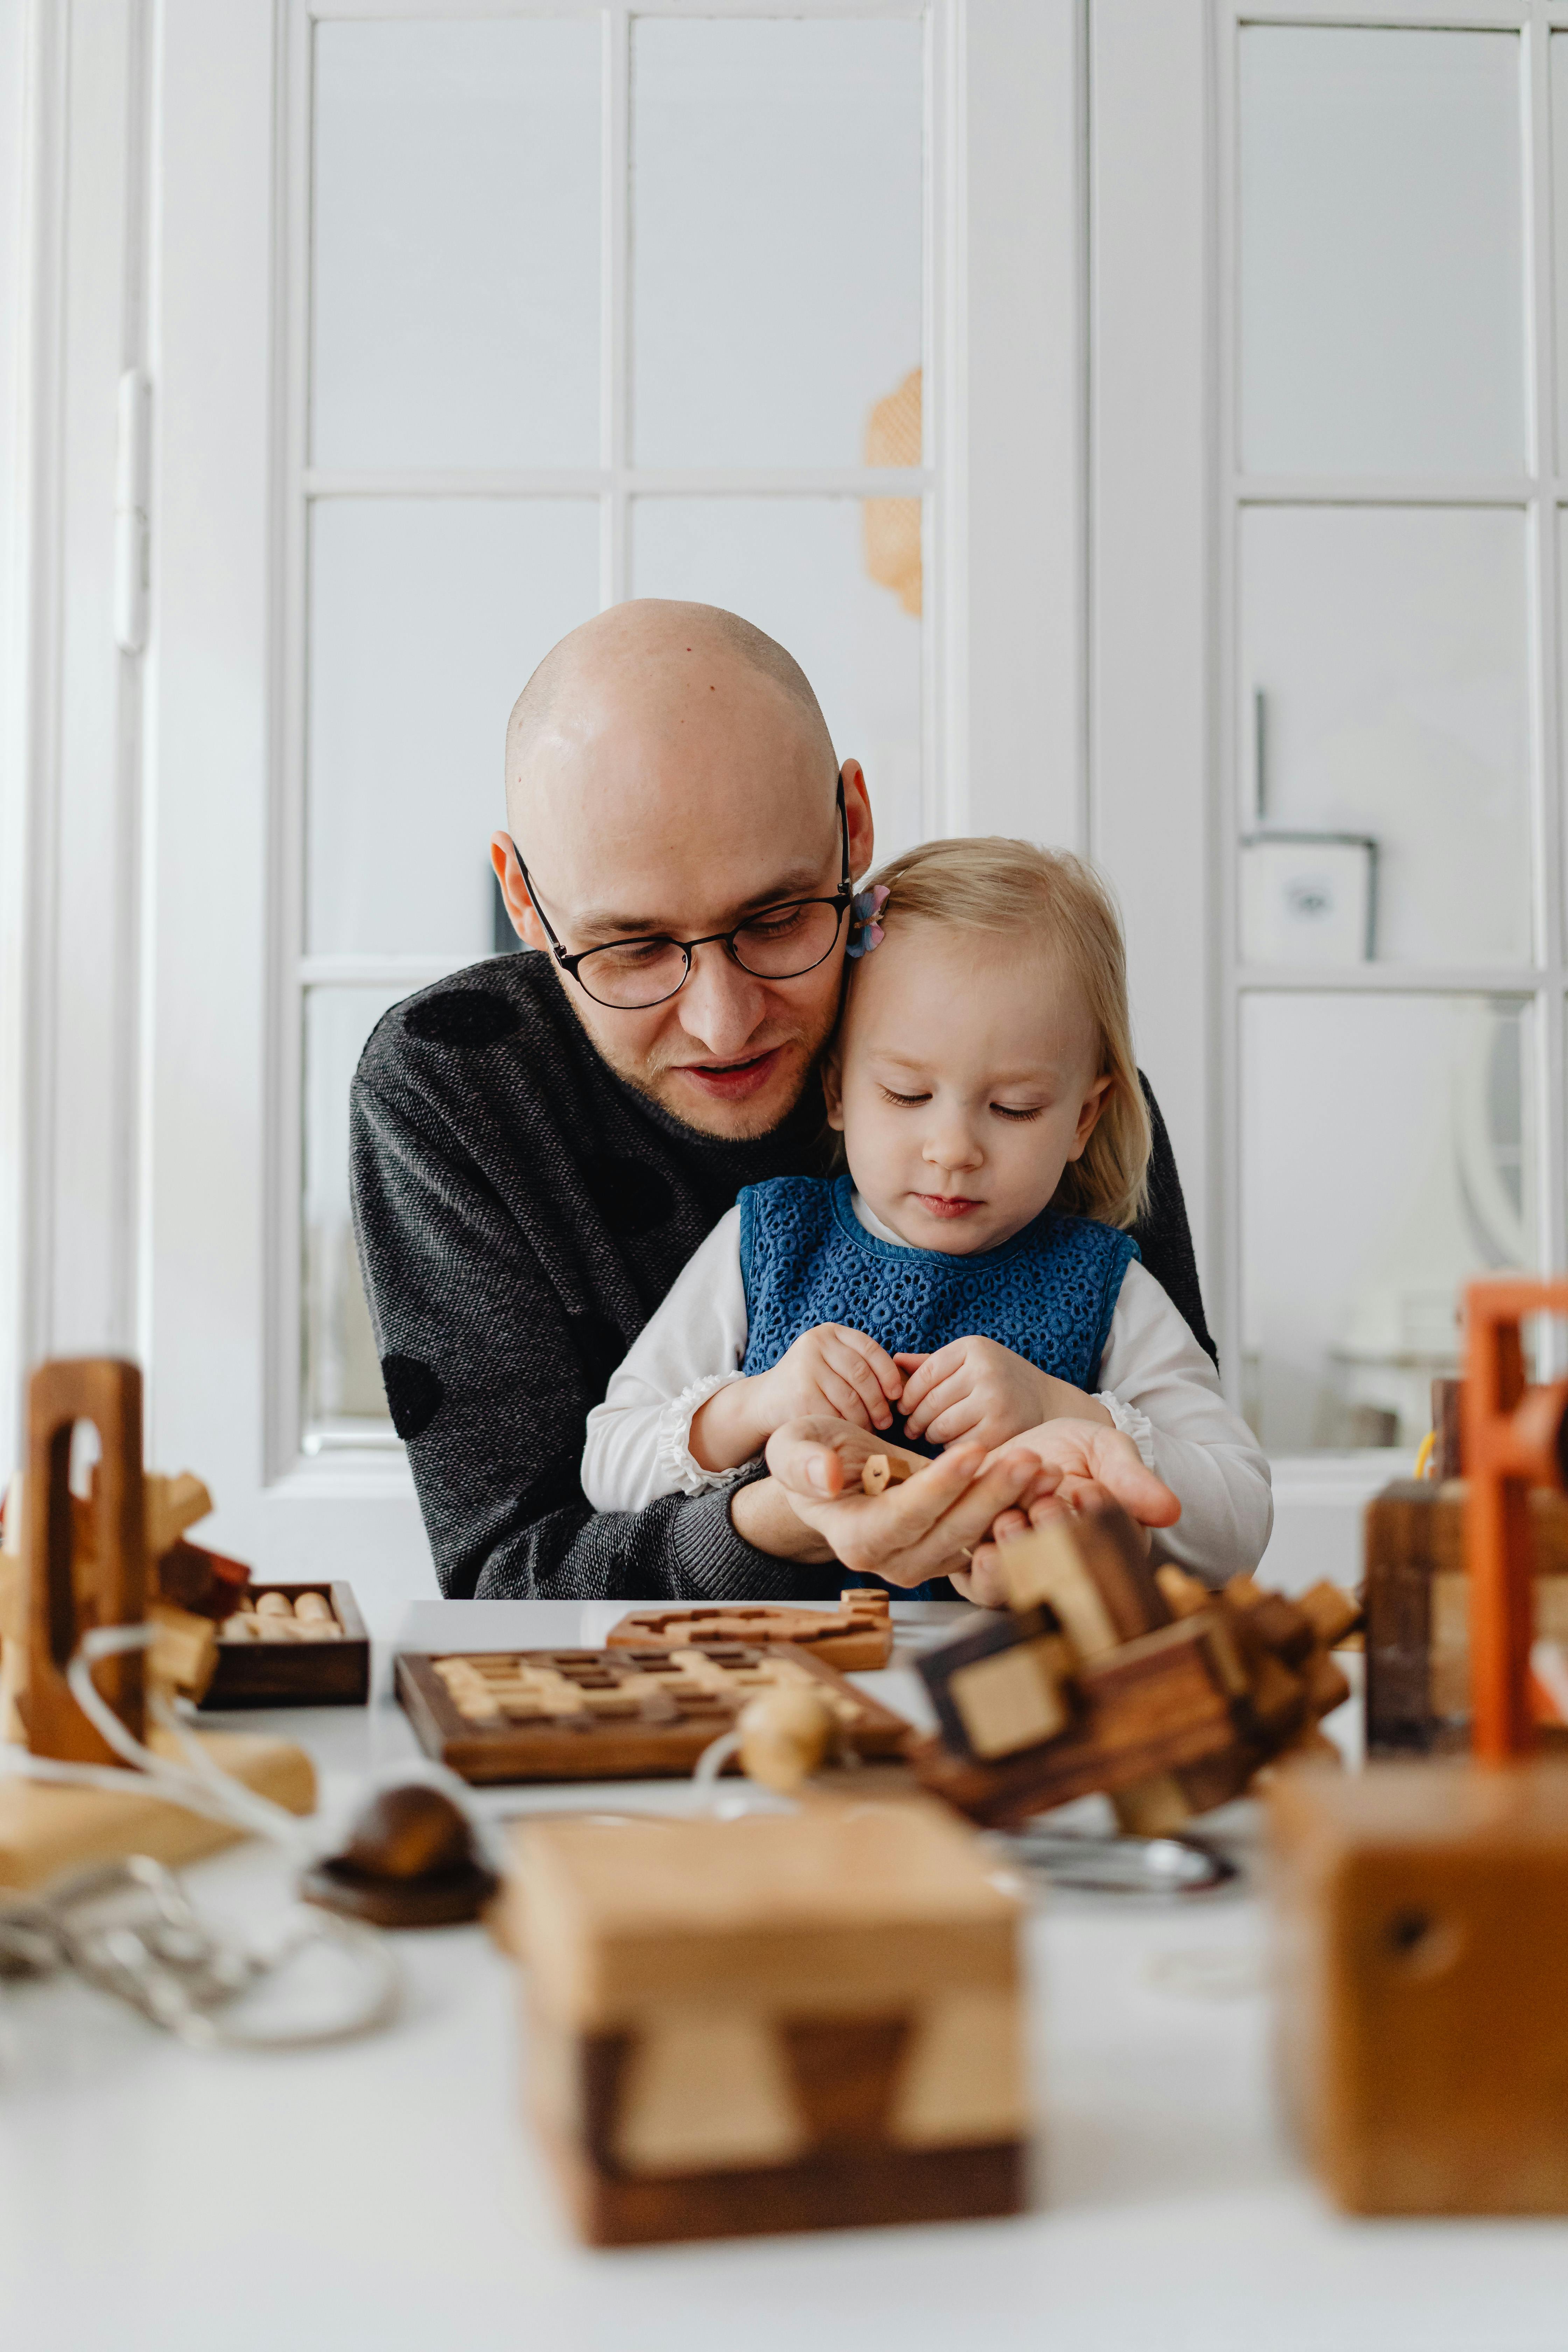 Father plays with small daughter | Source: Pexels